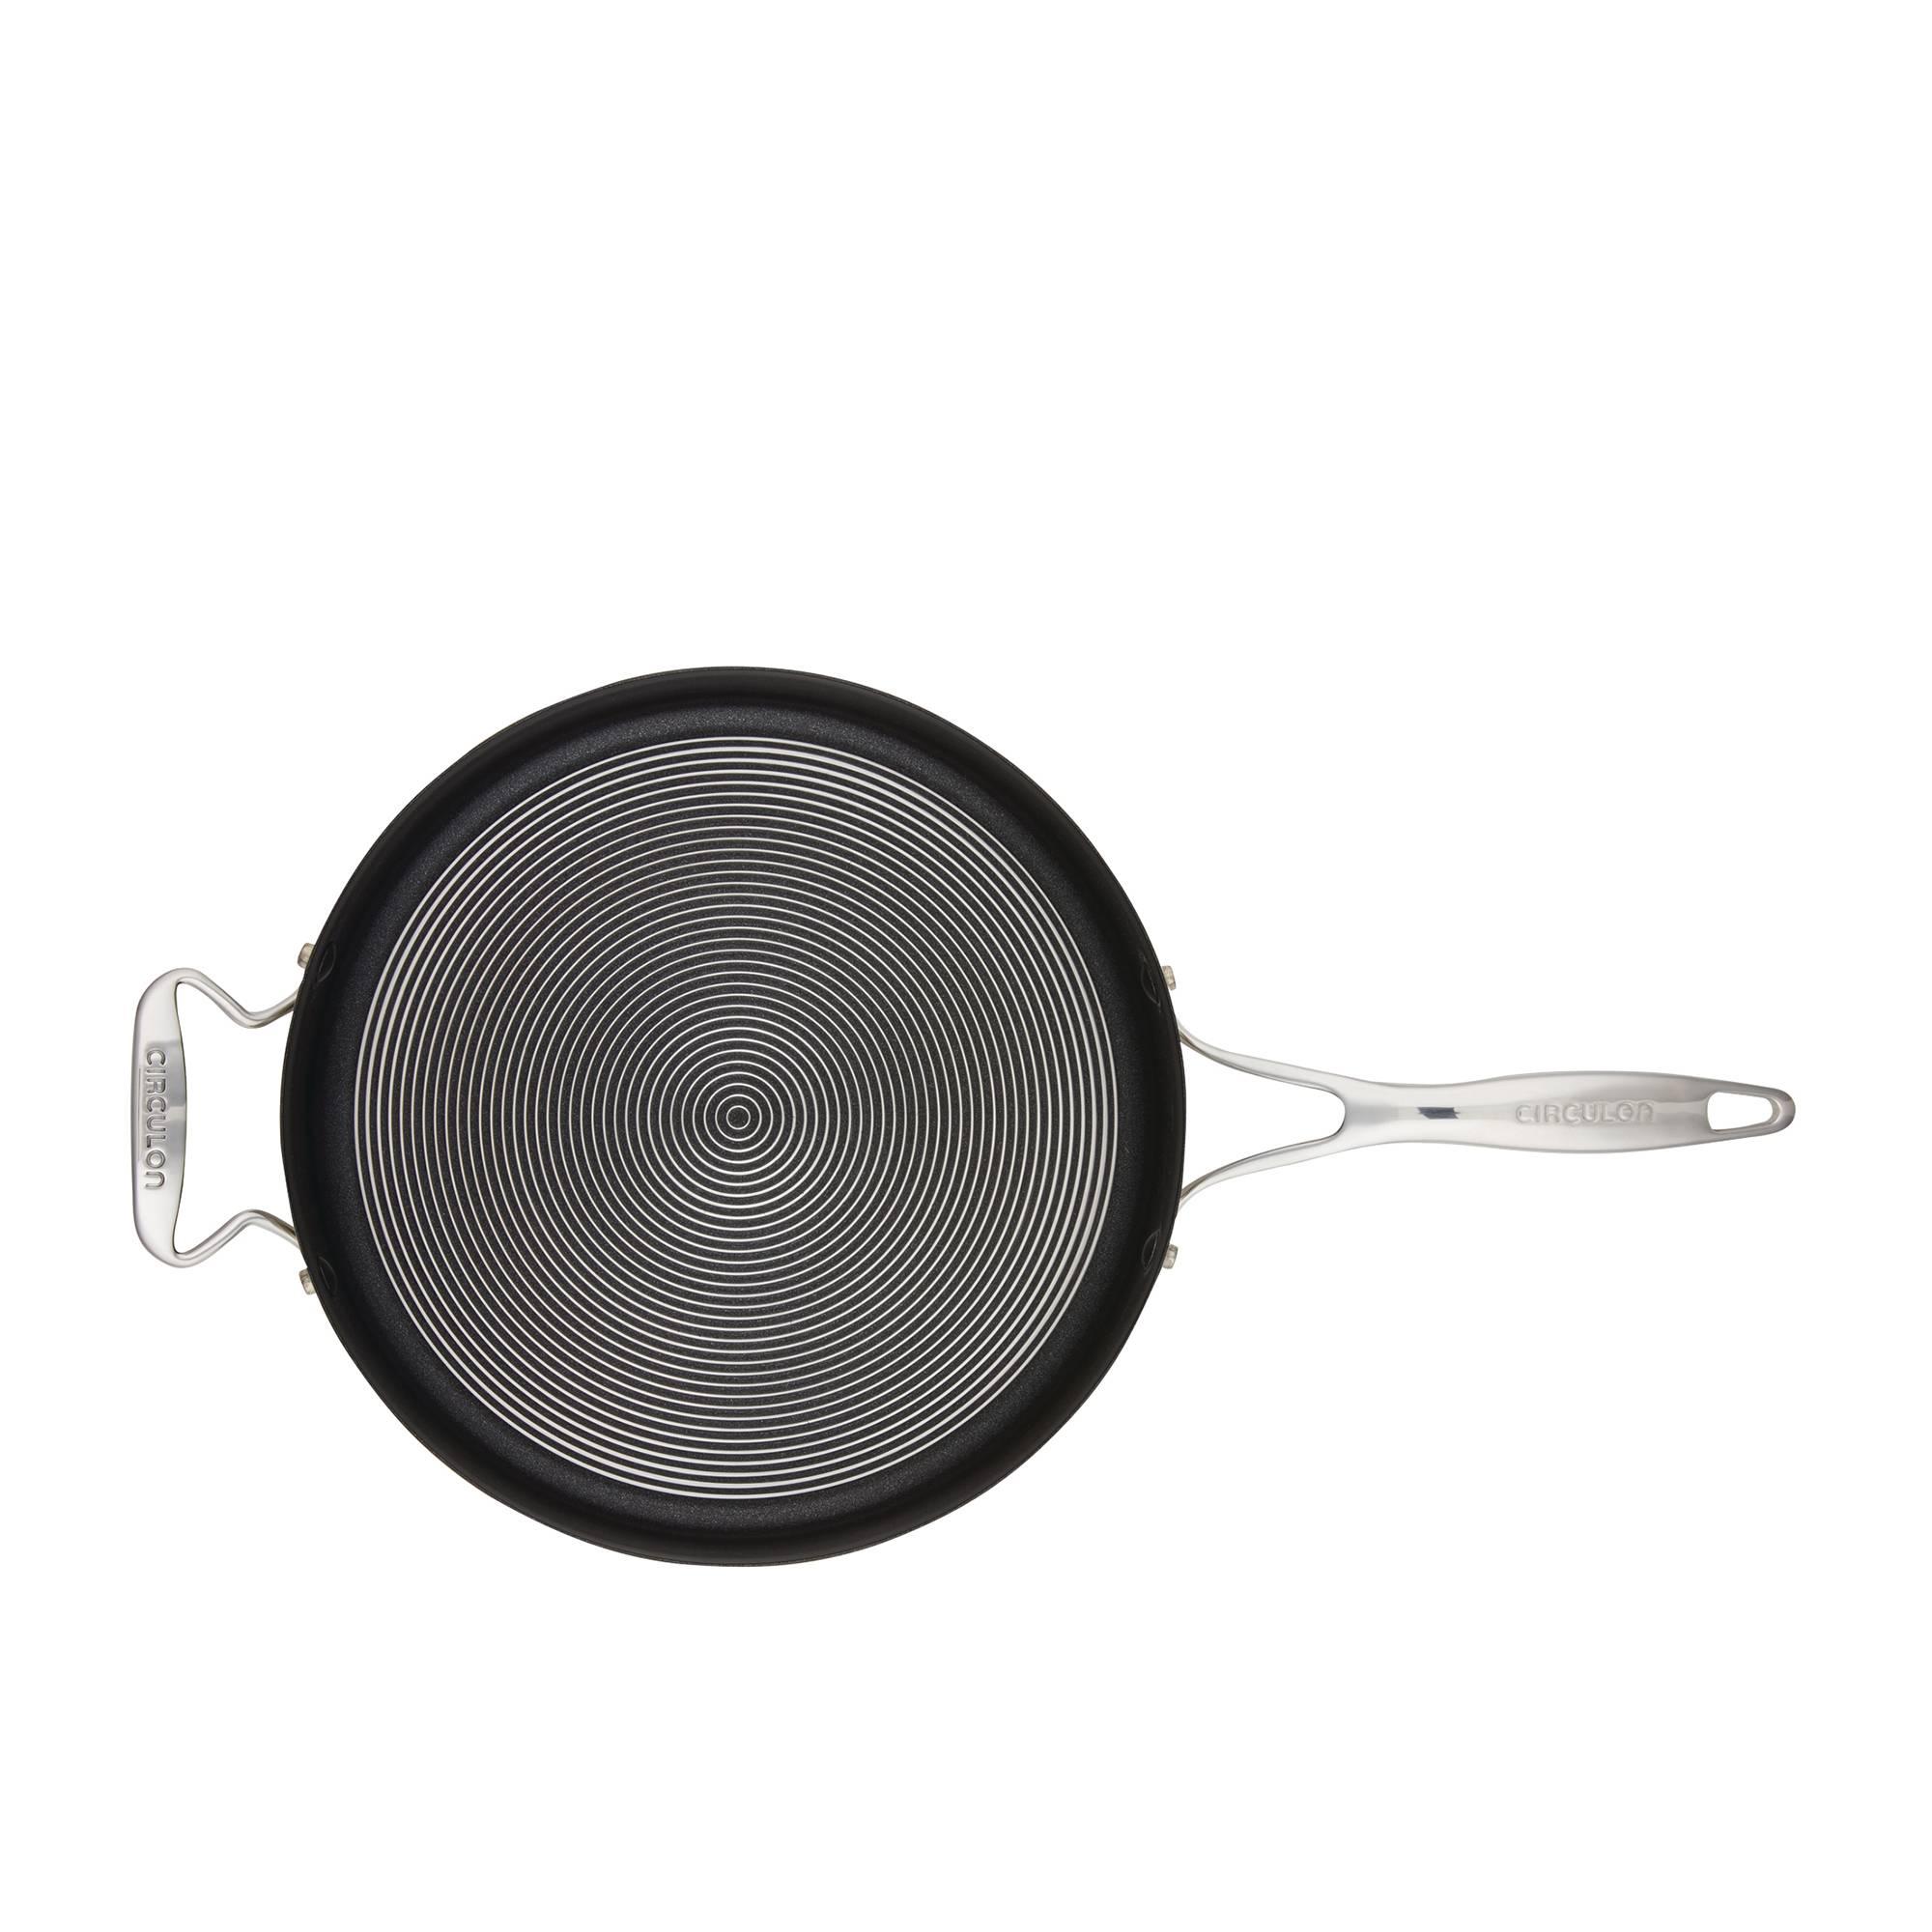 Circulon Steelshield S Series Covered Skillet with Helper Handle 30cm - 4.7L Image 3